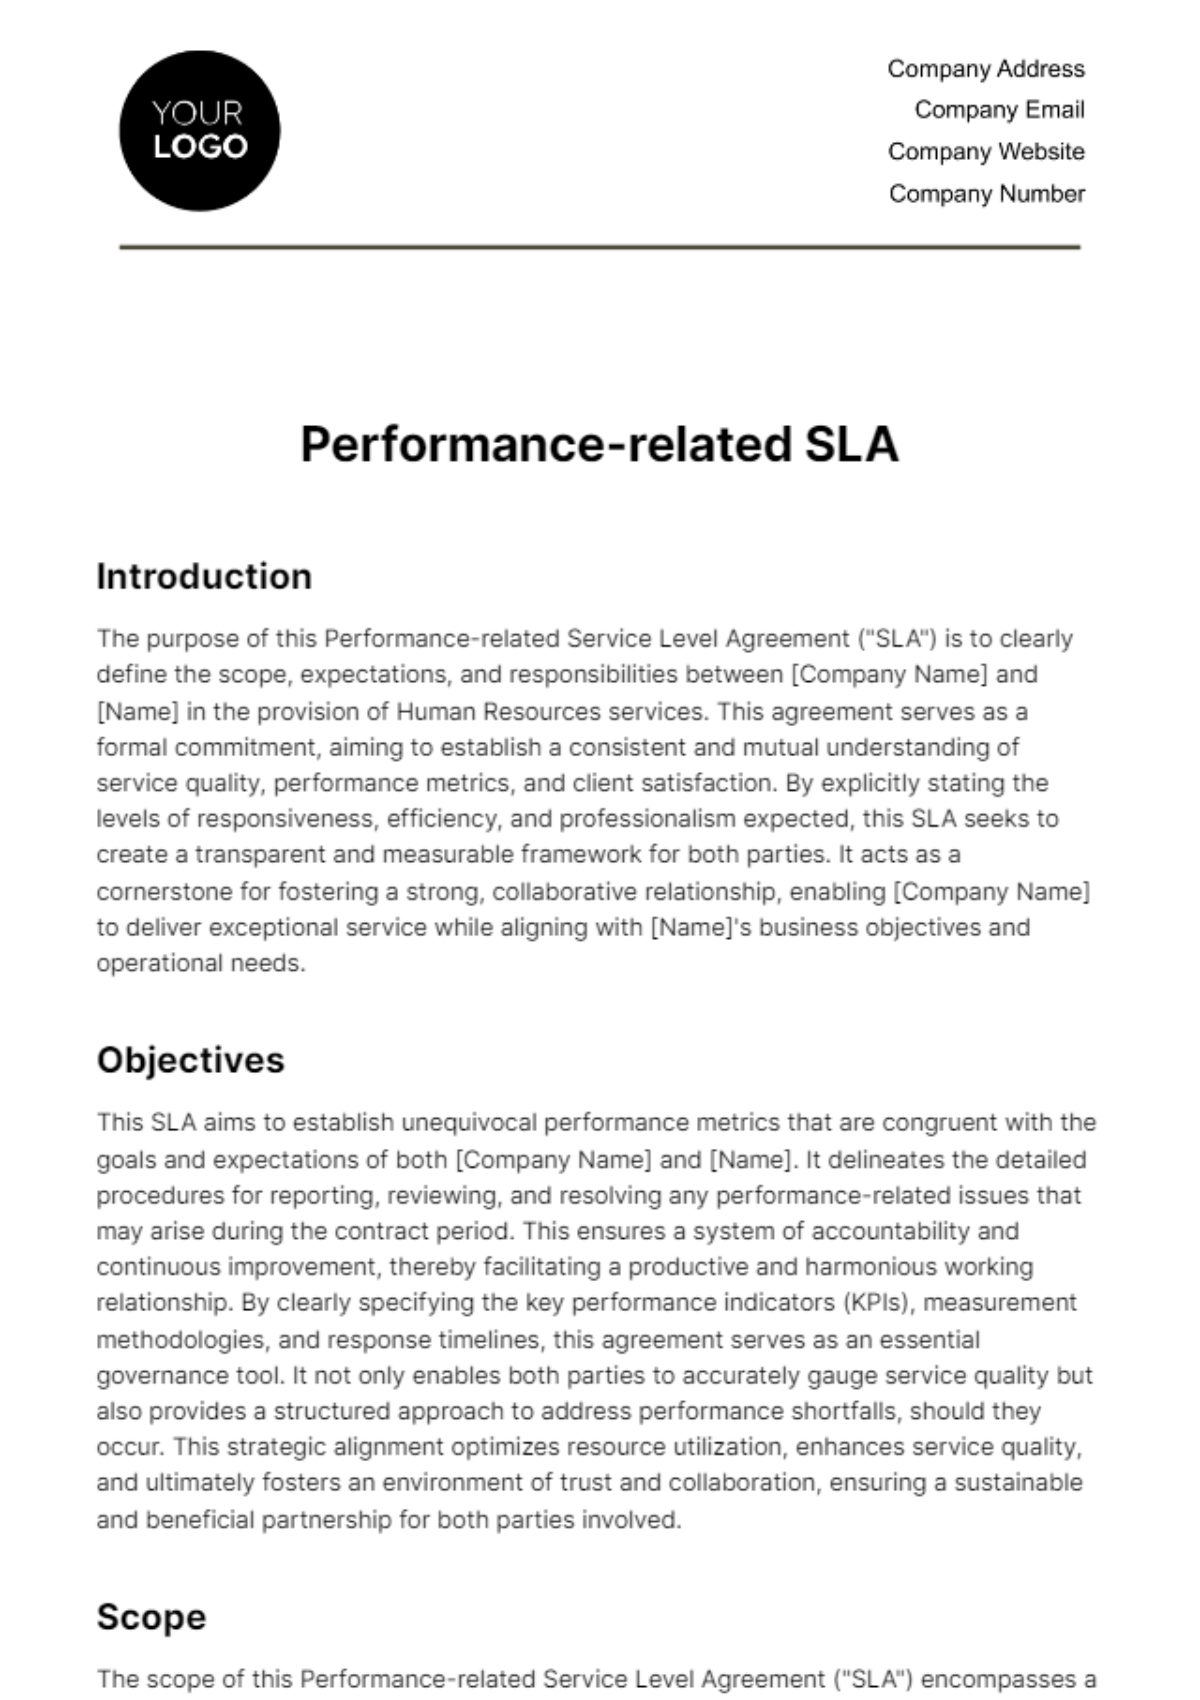 Free Performance-related SLA HR Template